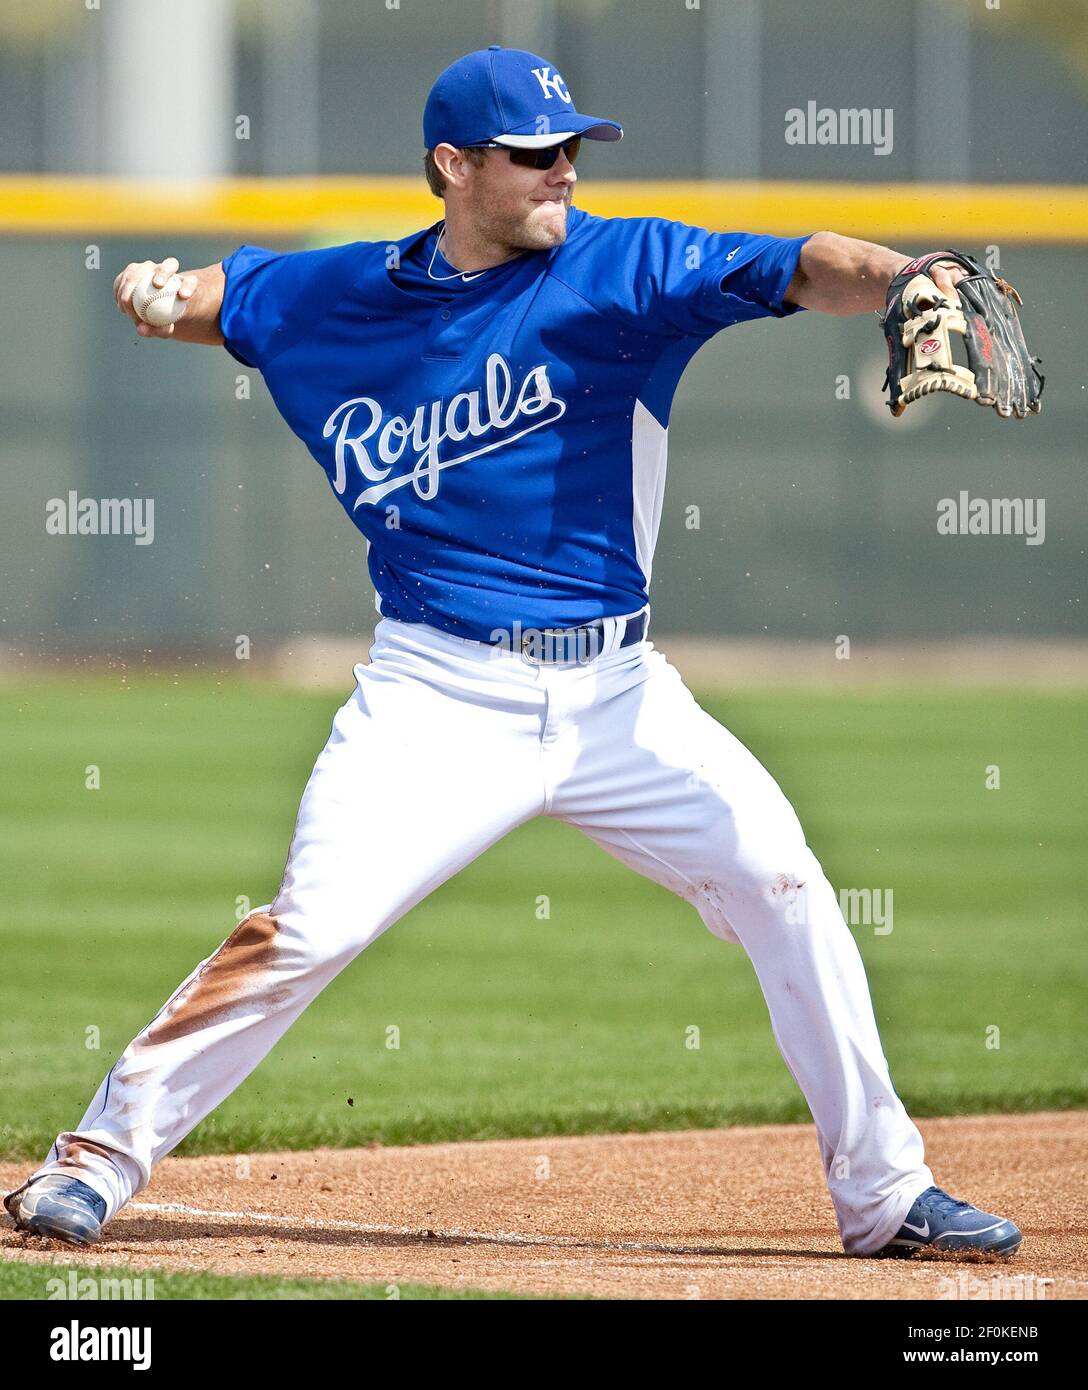 Kansas City Royals' third baseman Alex Gordon makes the throw to first  base for the final out in the eighth inning in the team's first  intrasquad game of spring training in Surprise